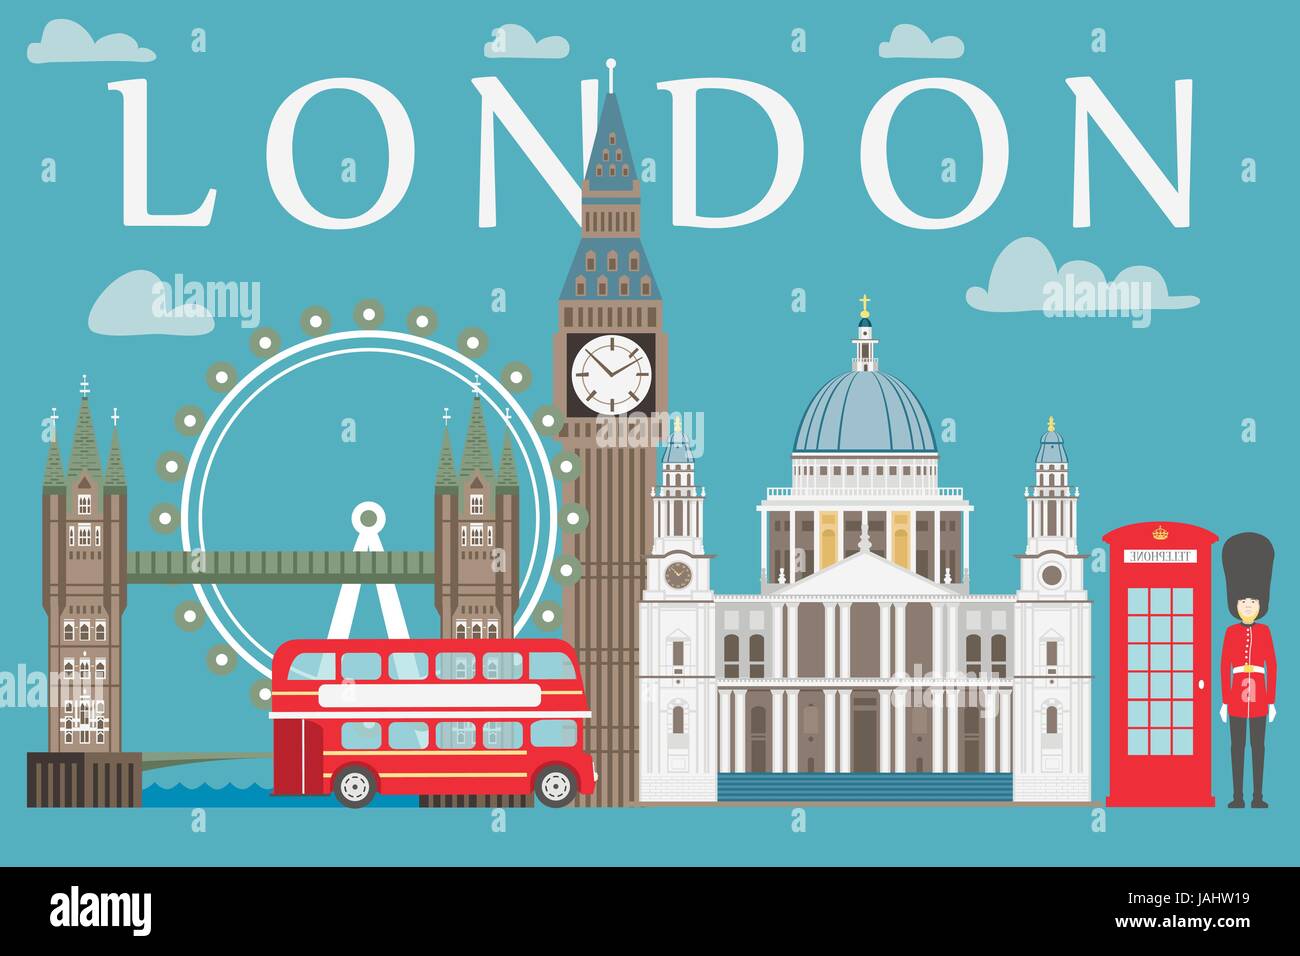 London travel info graphic. Vector illustration, Big Ben, eye, tower bridge and double decker bus, Police box, St Pauls Cathedral, queens guards, telephone. Stock Vector